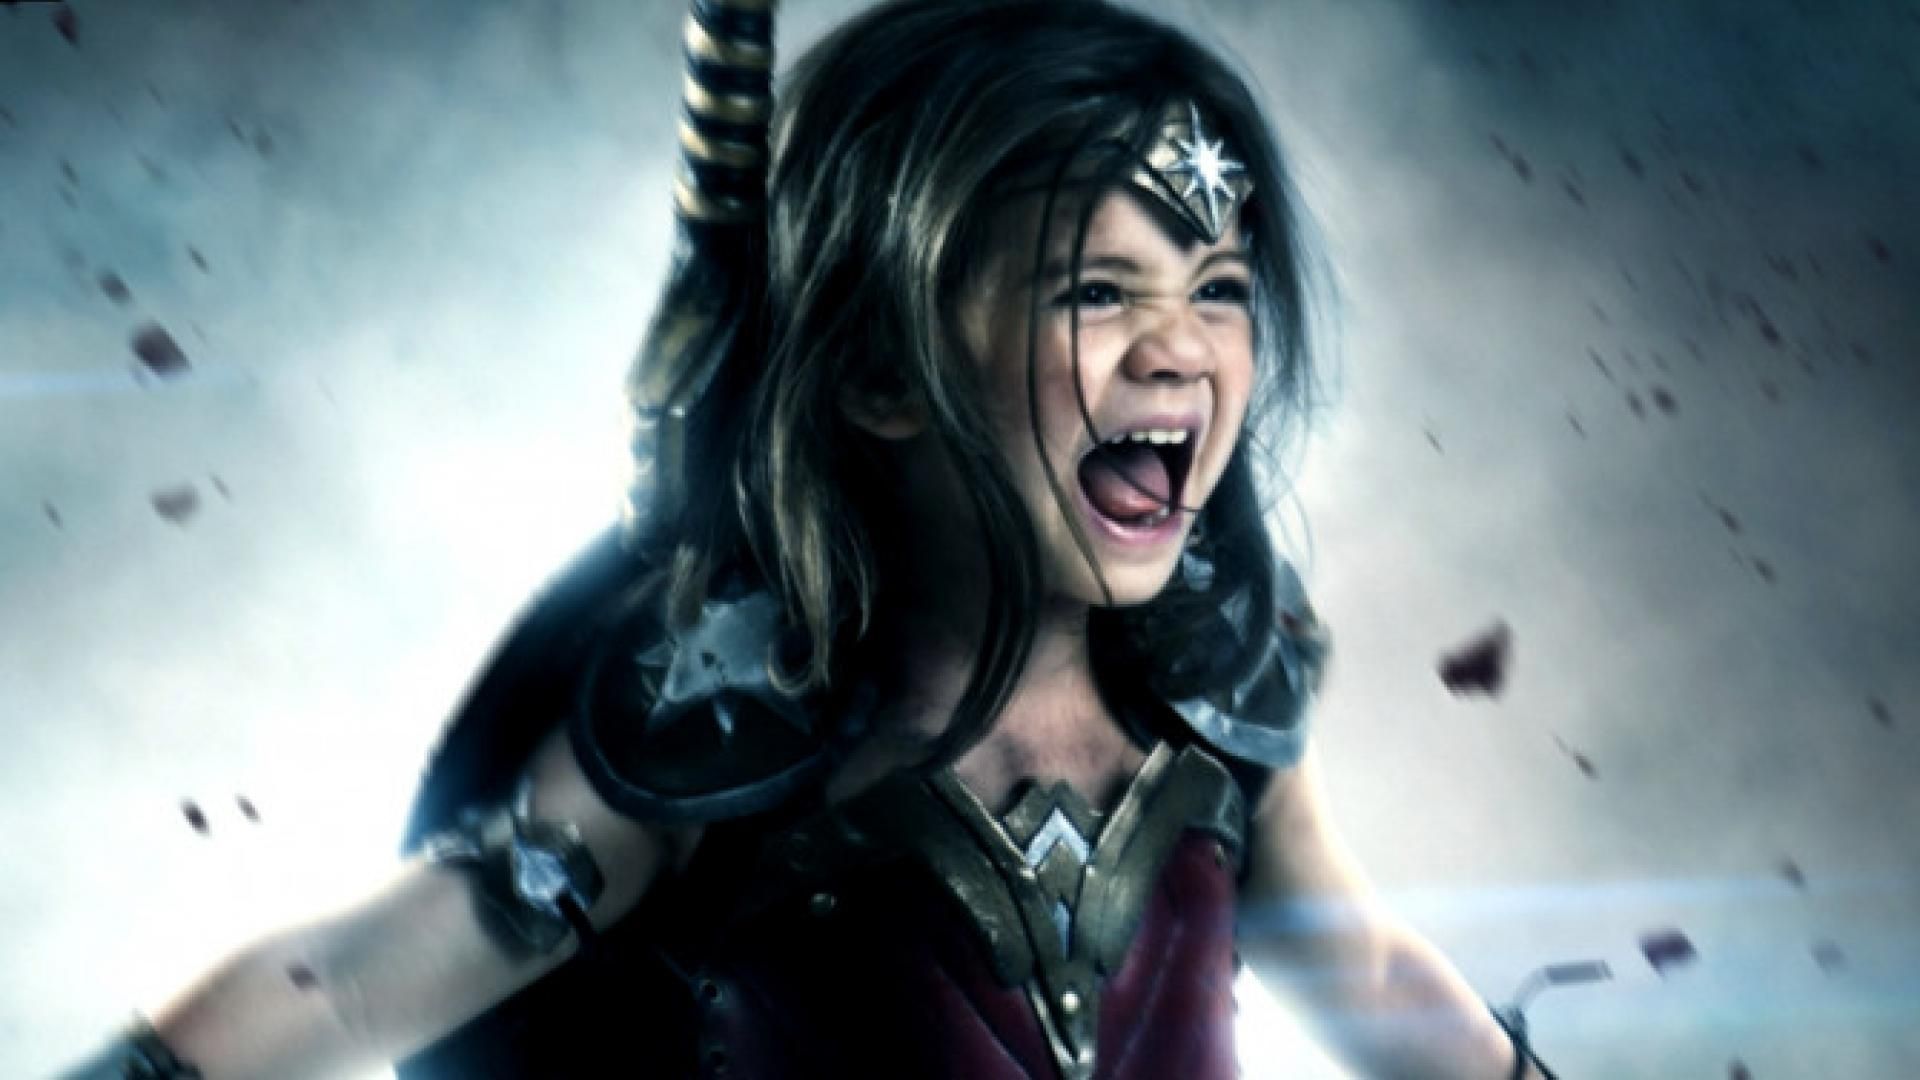 Small Wonder: 3 Year Old Girl Becomes Wonder Woman In Epic Photo